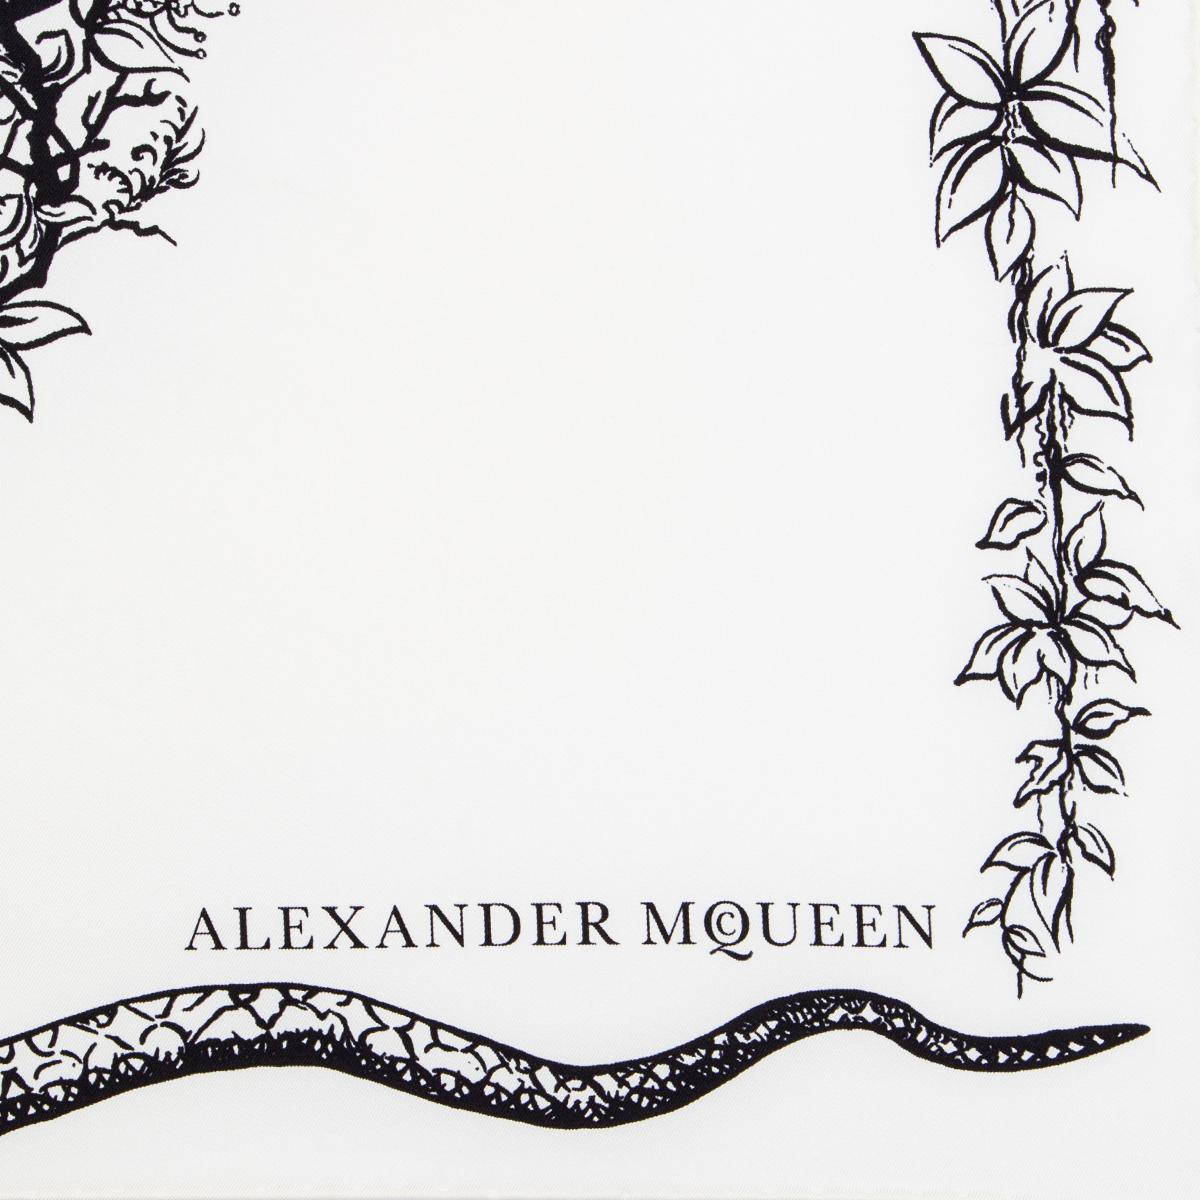 Alexander McQueen Snake Skull bandana scarf in white silk twill with details in black, grey and red and white beads in the corners. Has been worn and is in excellent condition.

Width 60cm (23.4in)
Length 60cm (23.4in)